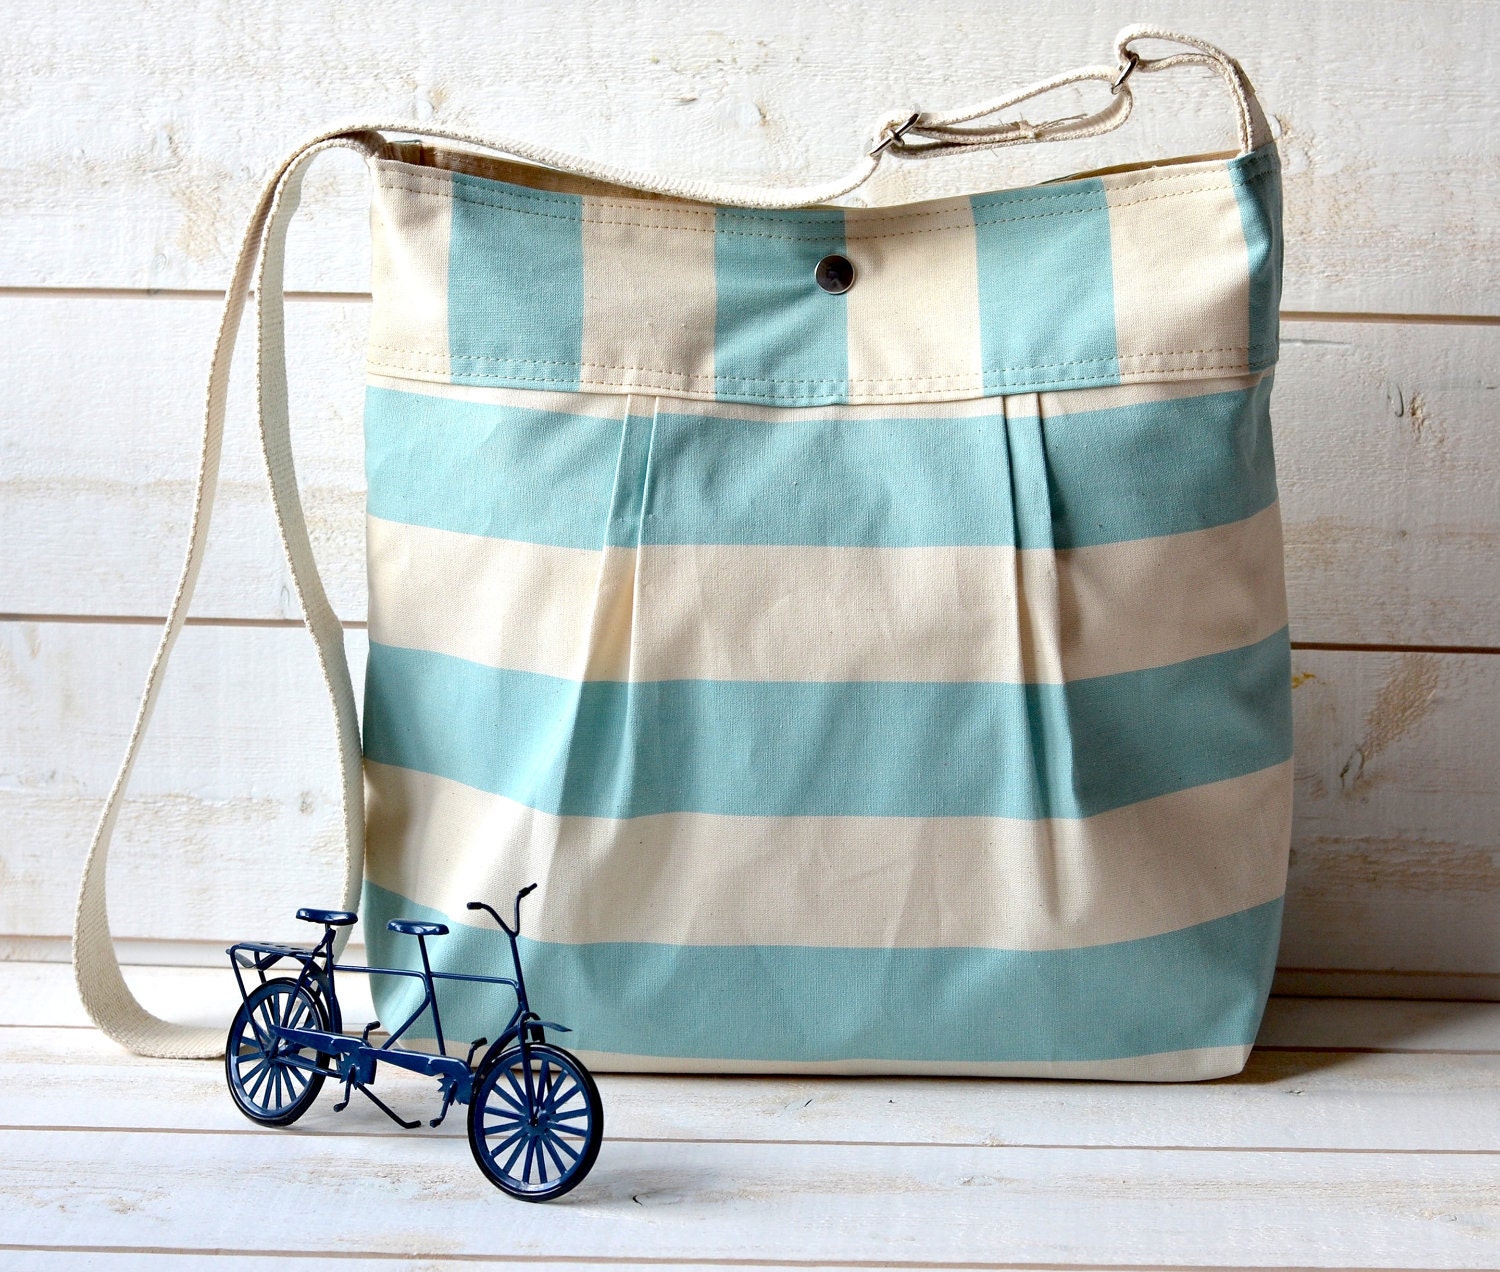 WATER PROOF- Cross body bag / Diaper bag STOCKHOLM Pale Turquoise and Ecru Striped/ Summer bag - ikabags